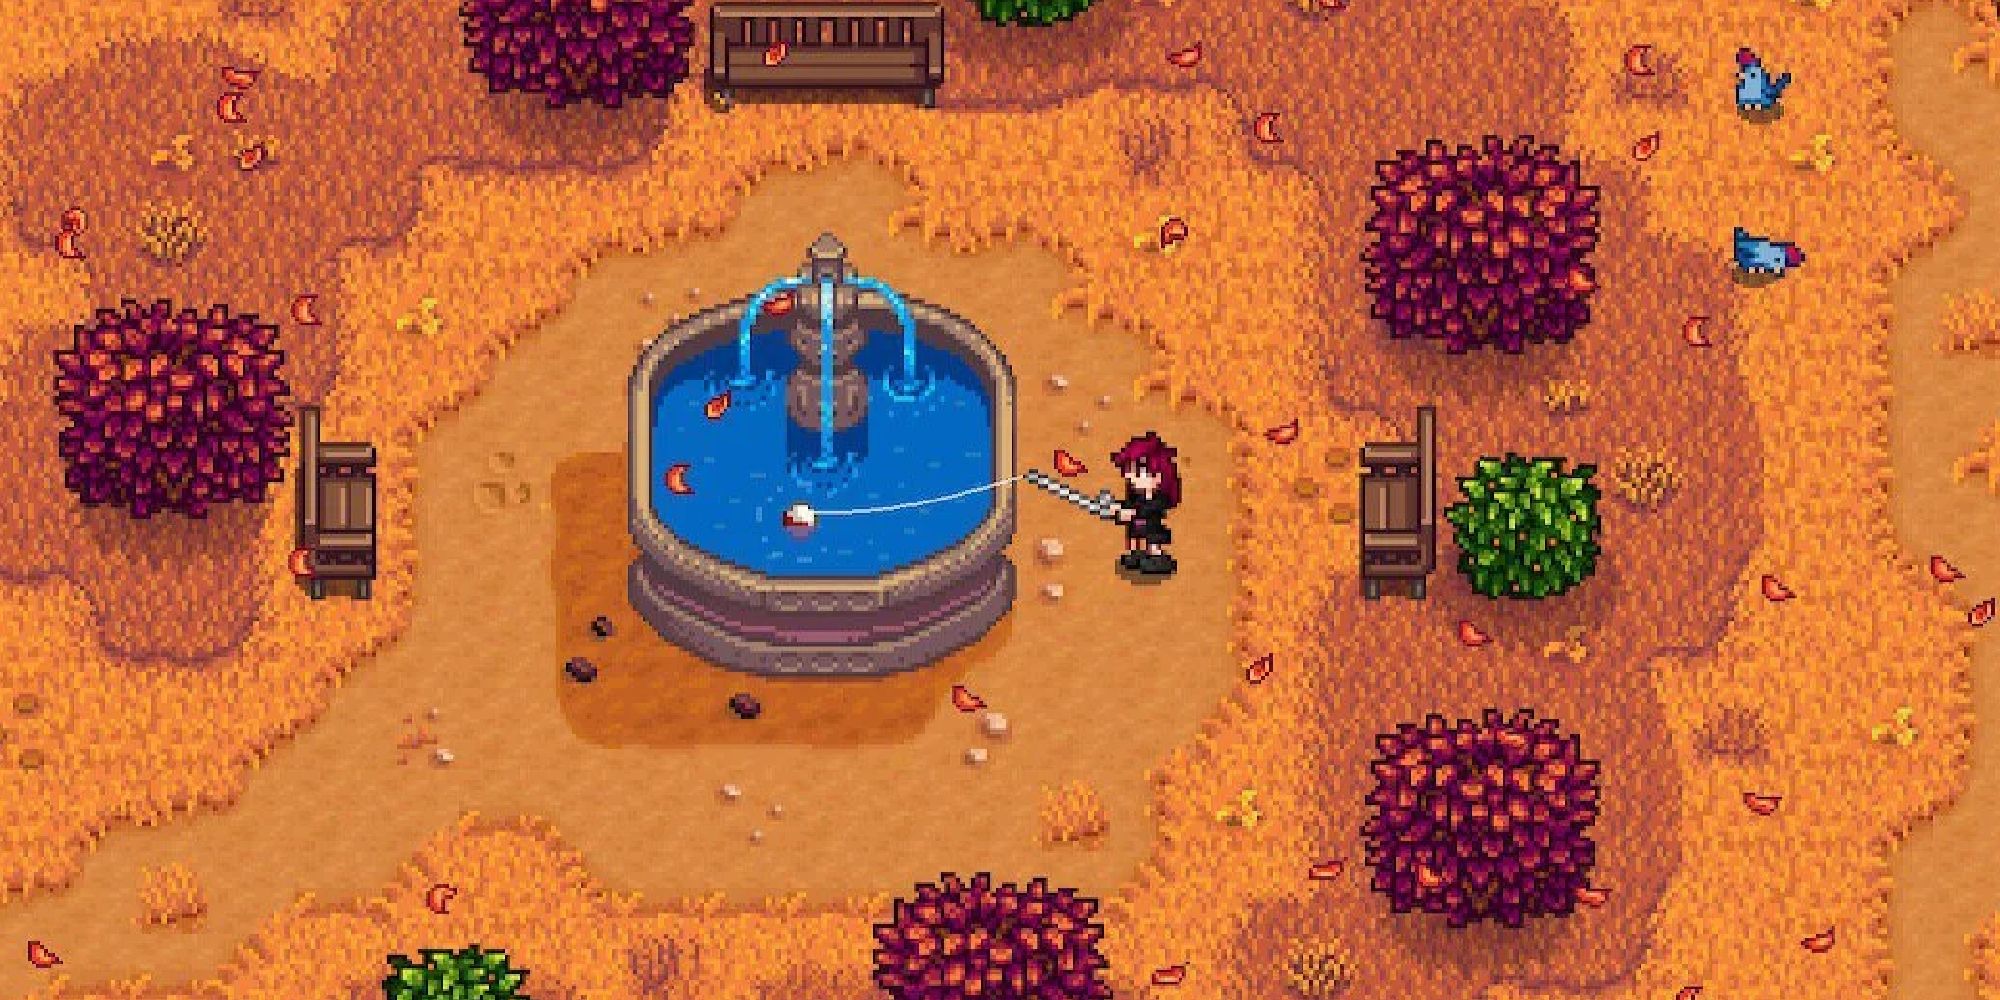 stardew valley player fishing from fountain near community center